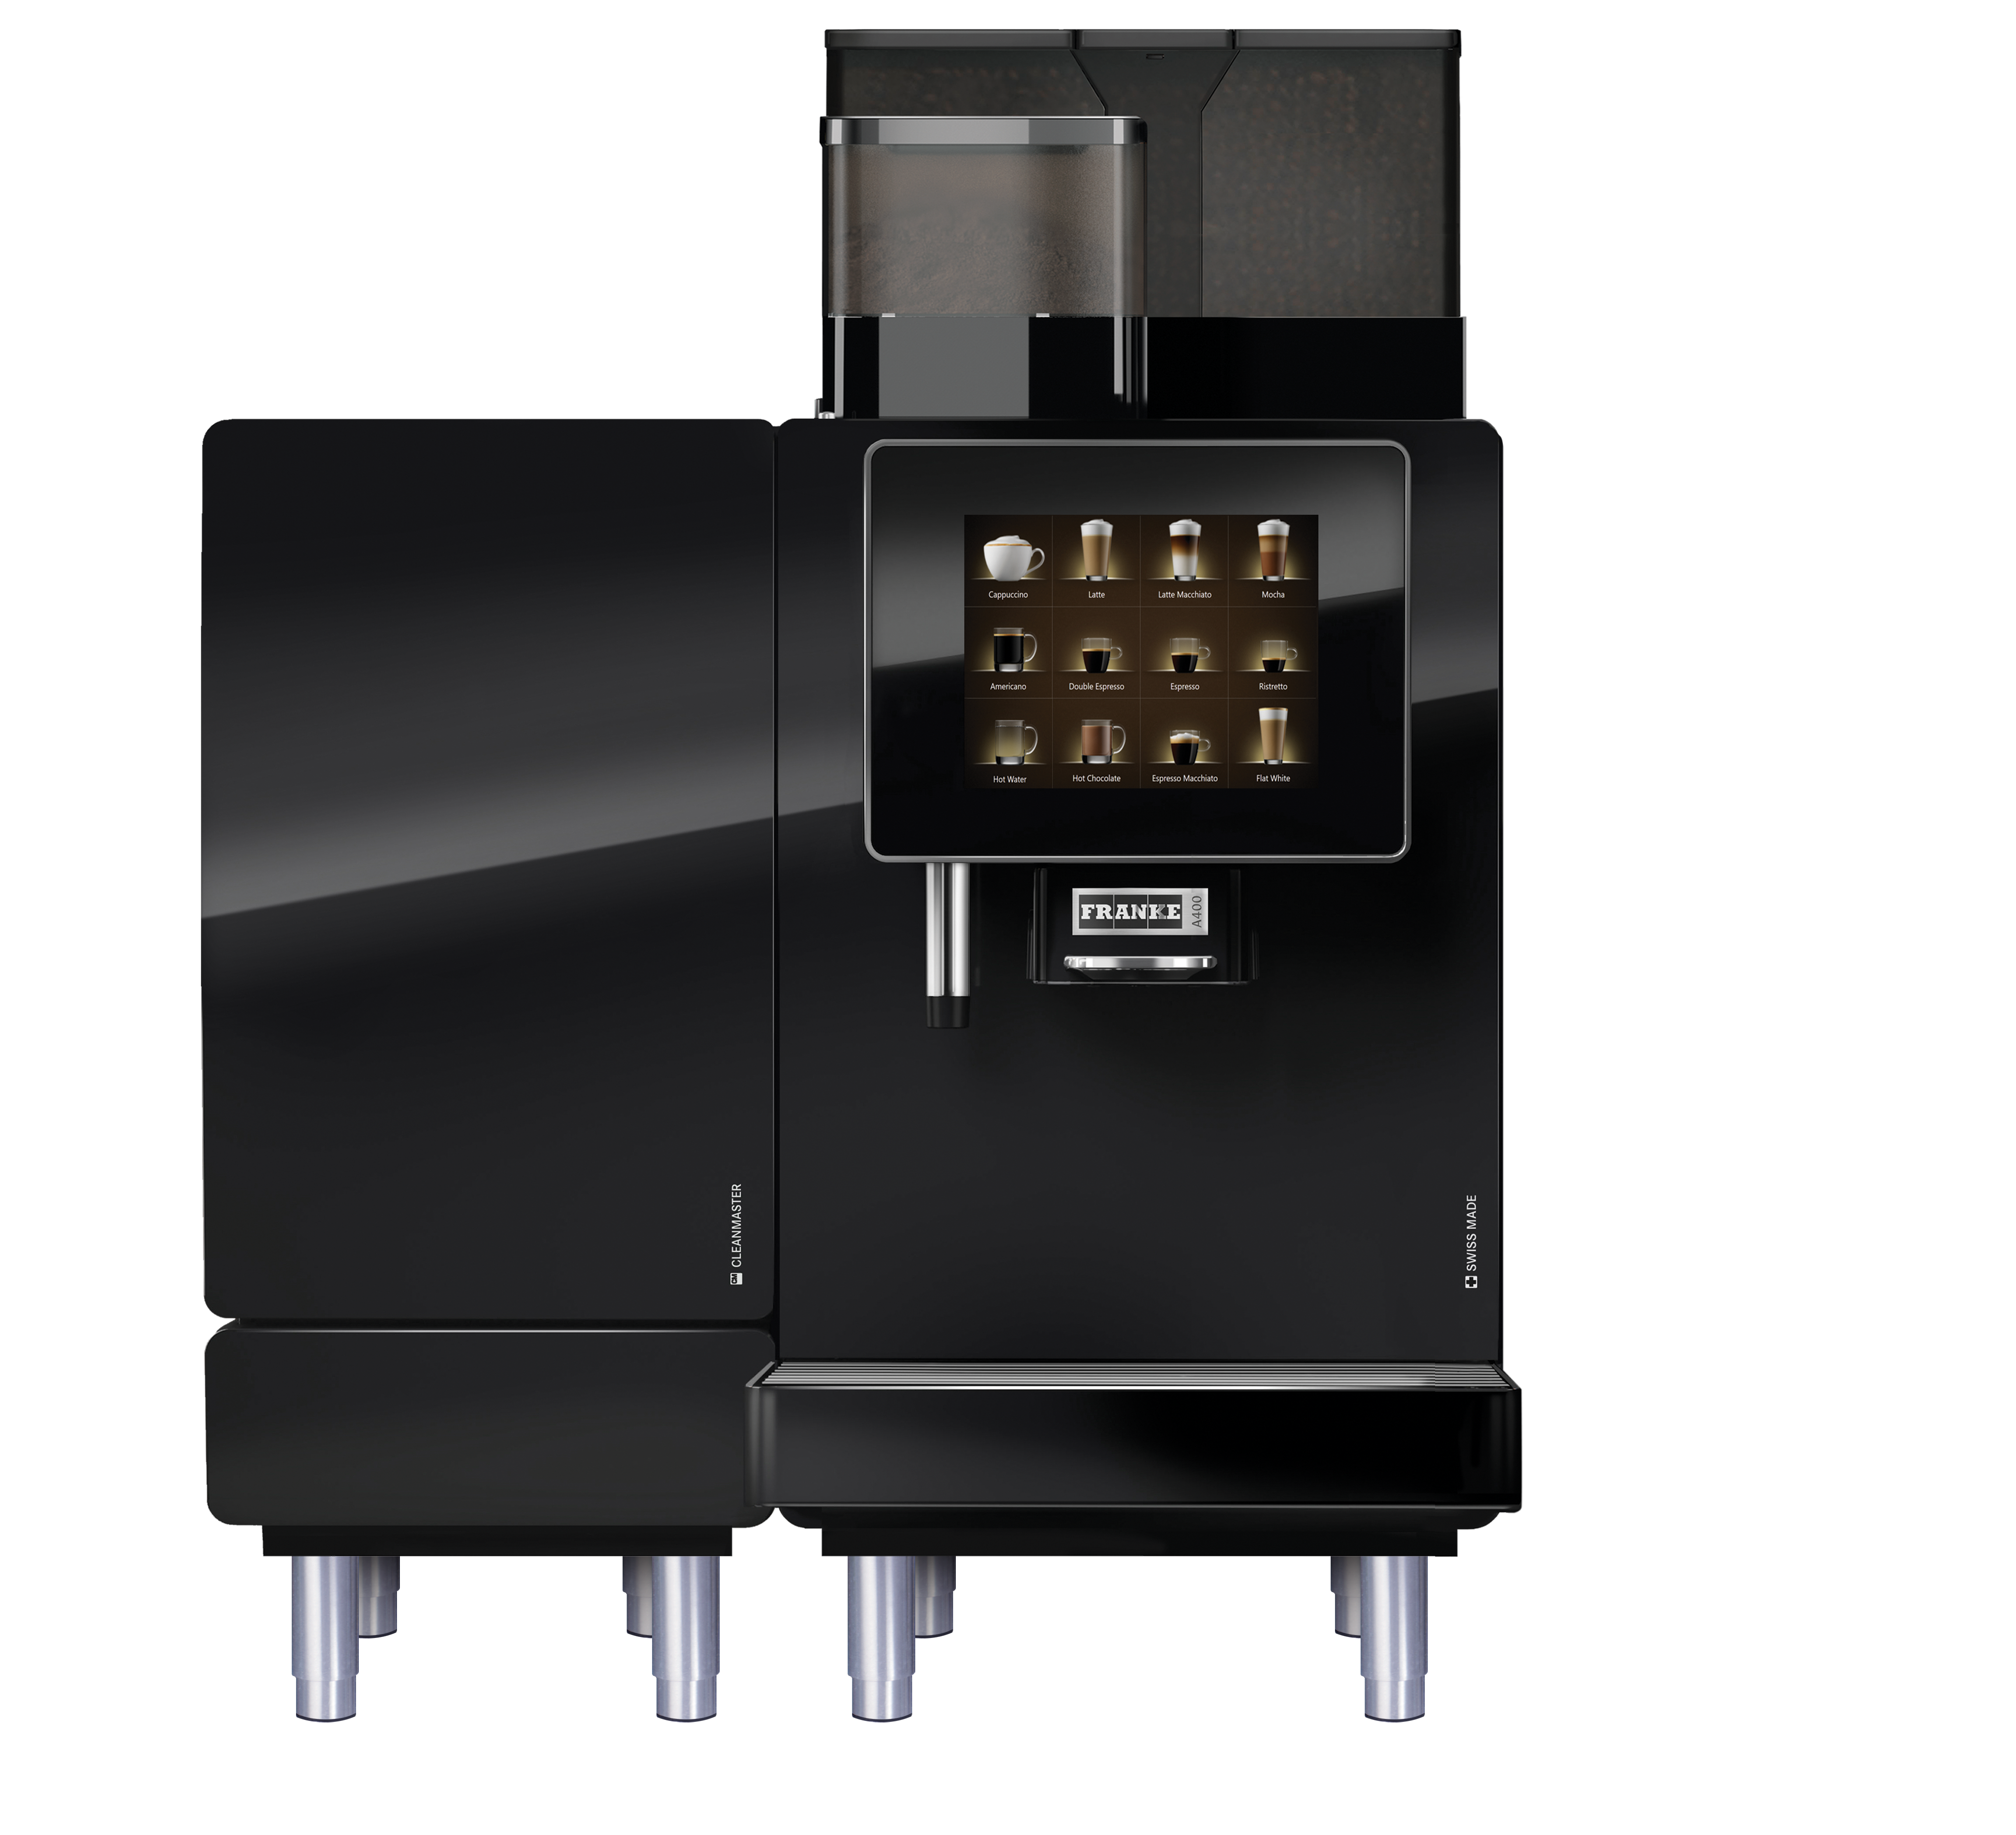 SCAN Malta - Delicious Coffee at the touch of a button - Philips Senseo  Original HD7819/60 Coffee Machine + Milk Frother - now only €89.95 Visit